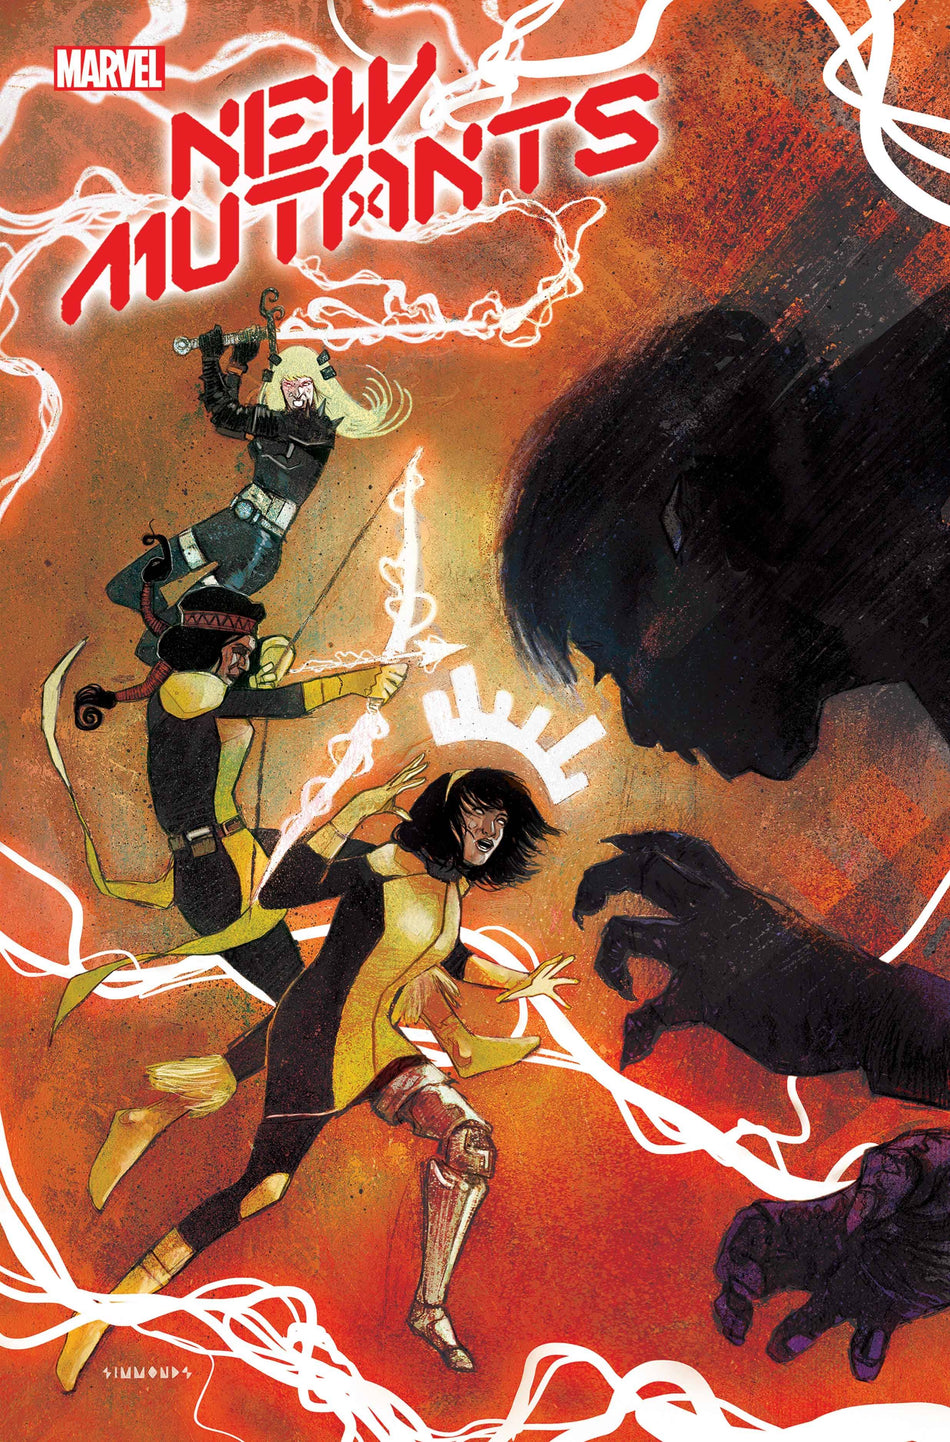 Photo of New Mutants Issue 21 comic sold by Stronghold Collectibles